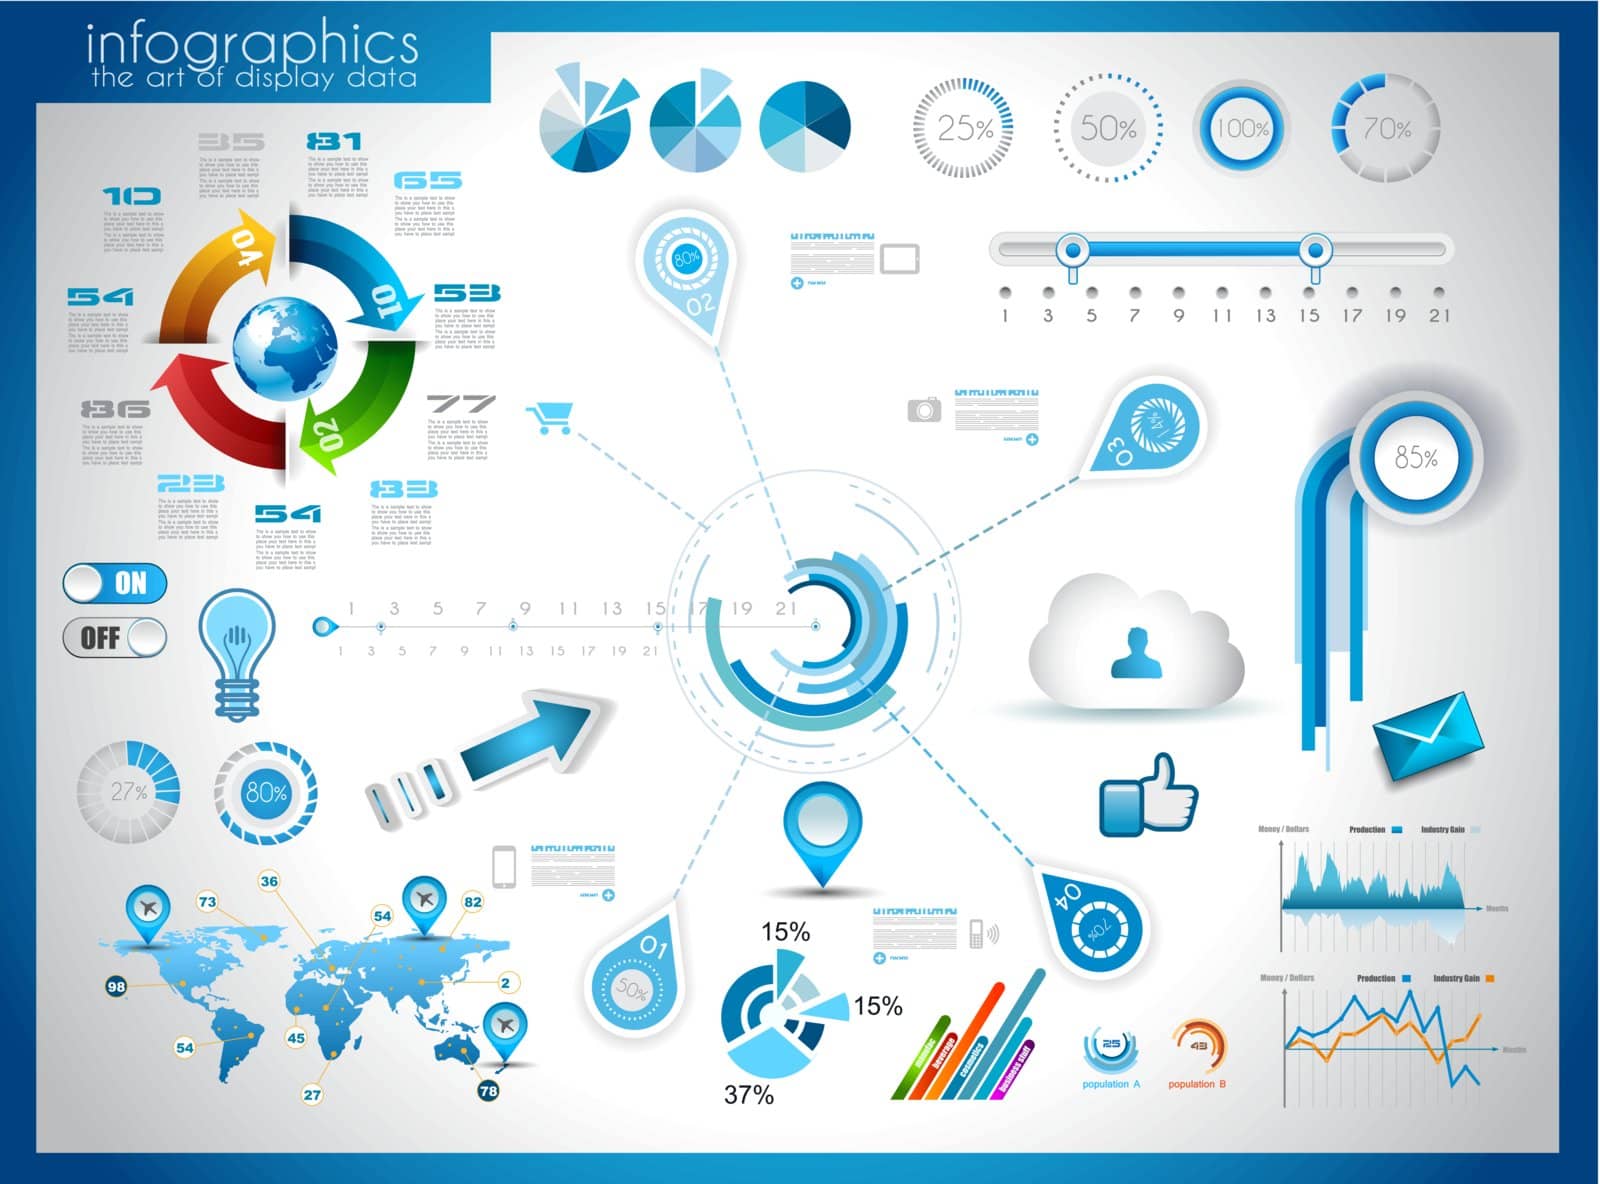 Infographic elements - set of paper tags, technology icons, cloud cmputing, graphs, paper tags, arrows, world map and so on. Ideal for statistic data display.